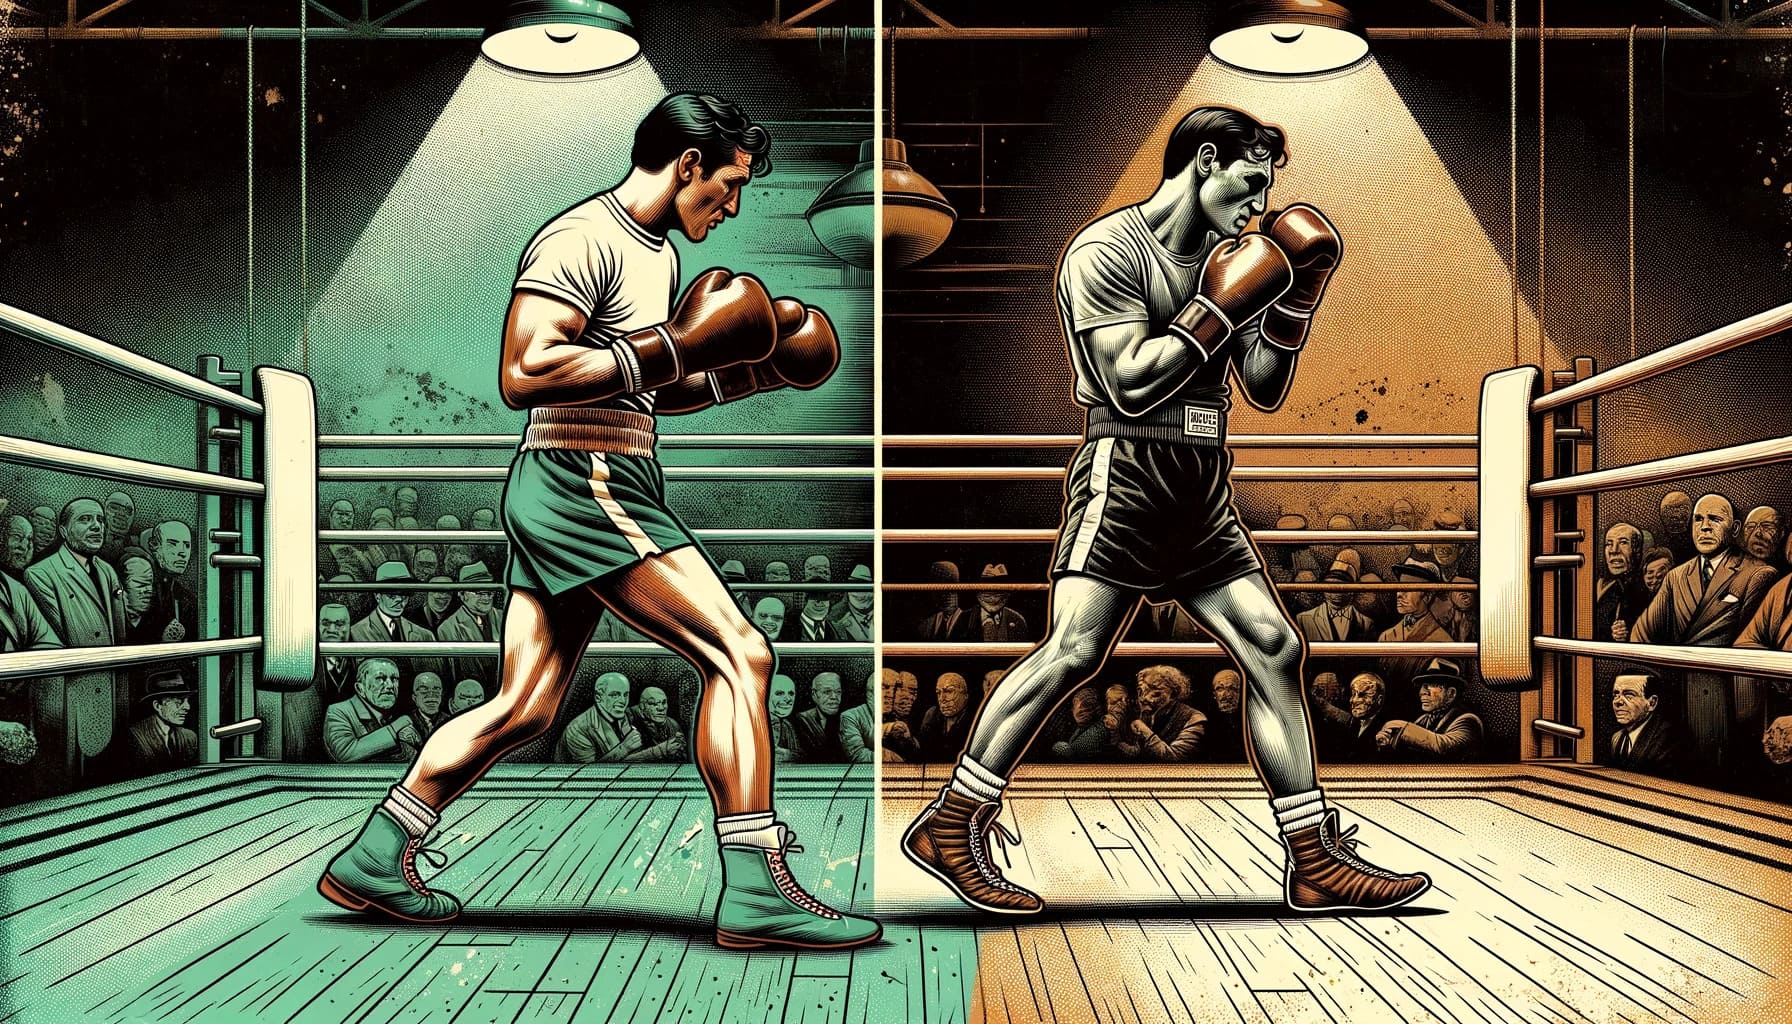 contrasting styles of boxing one representing